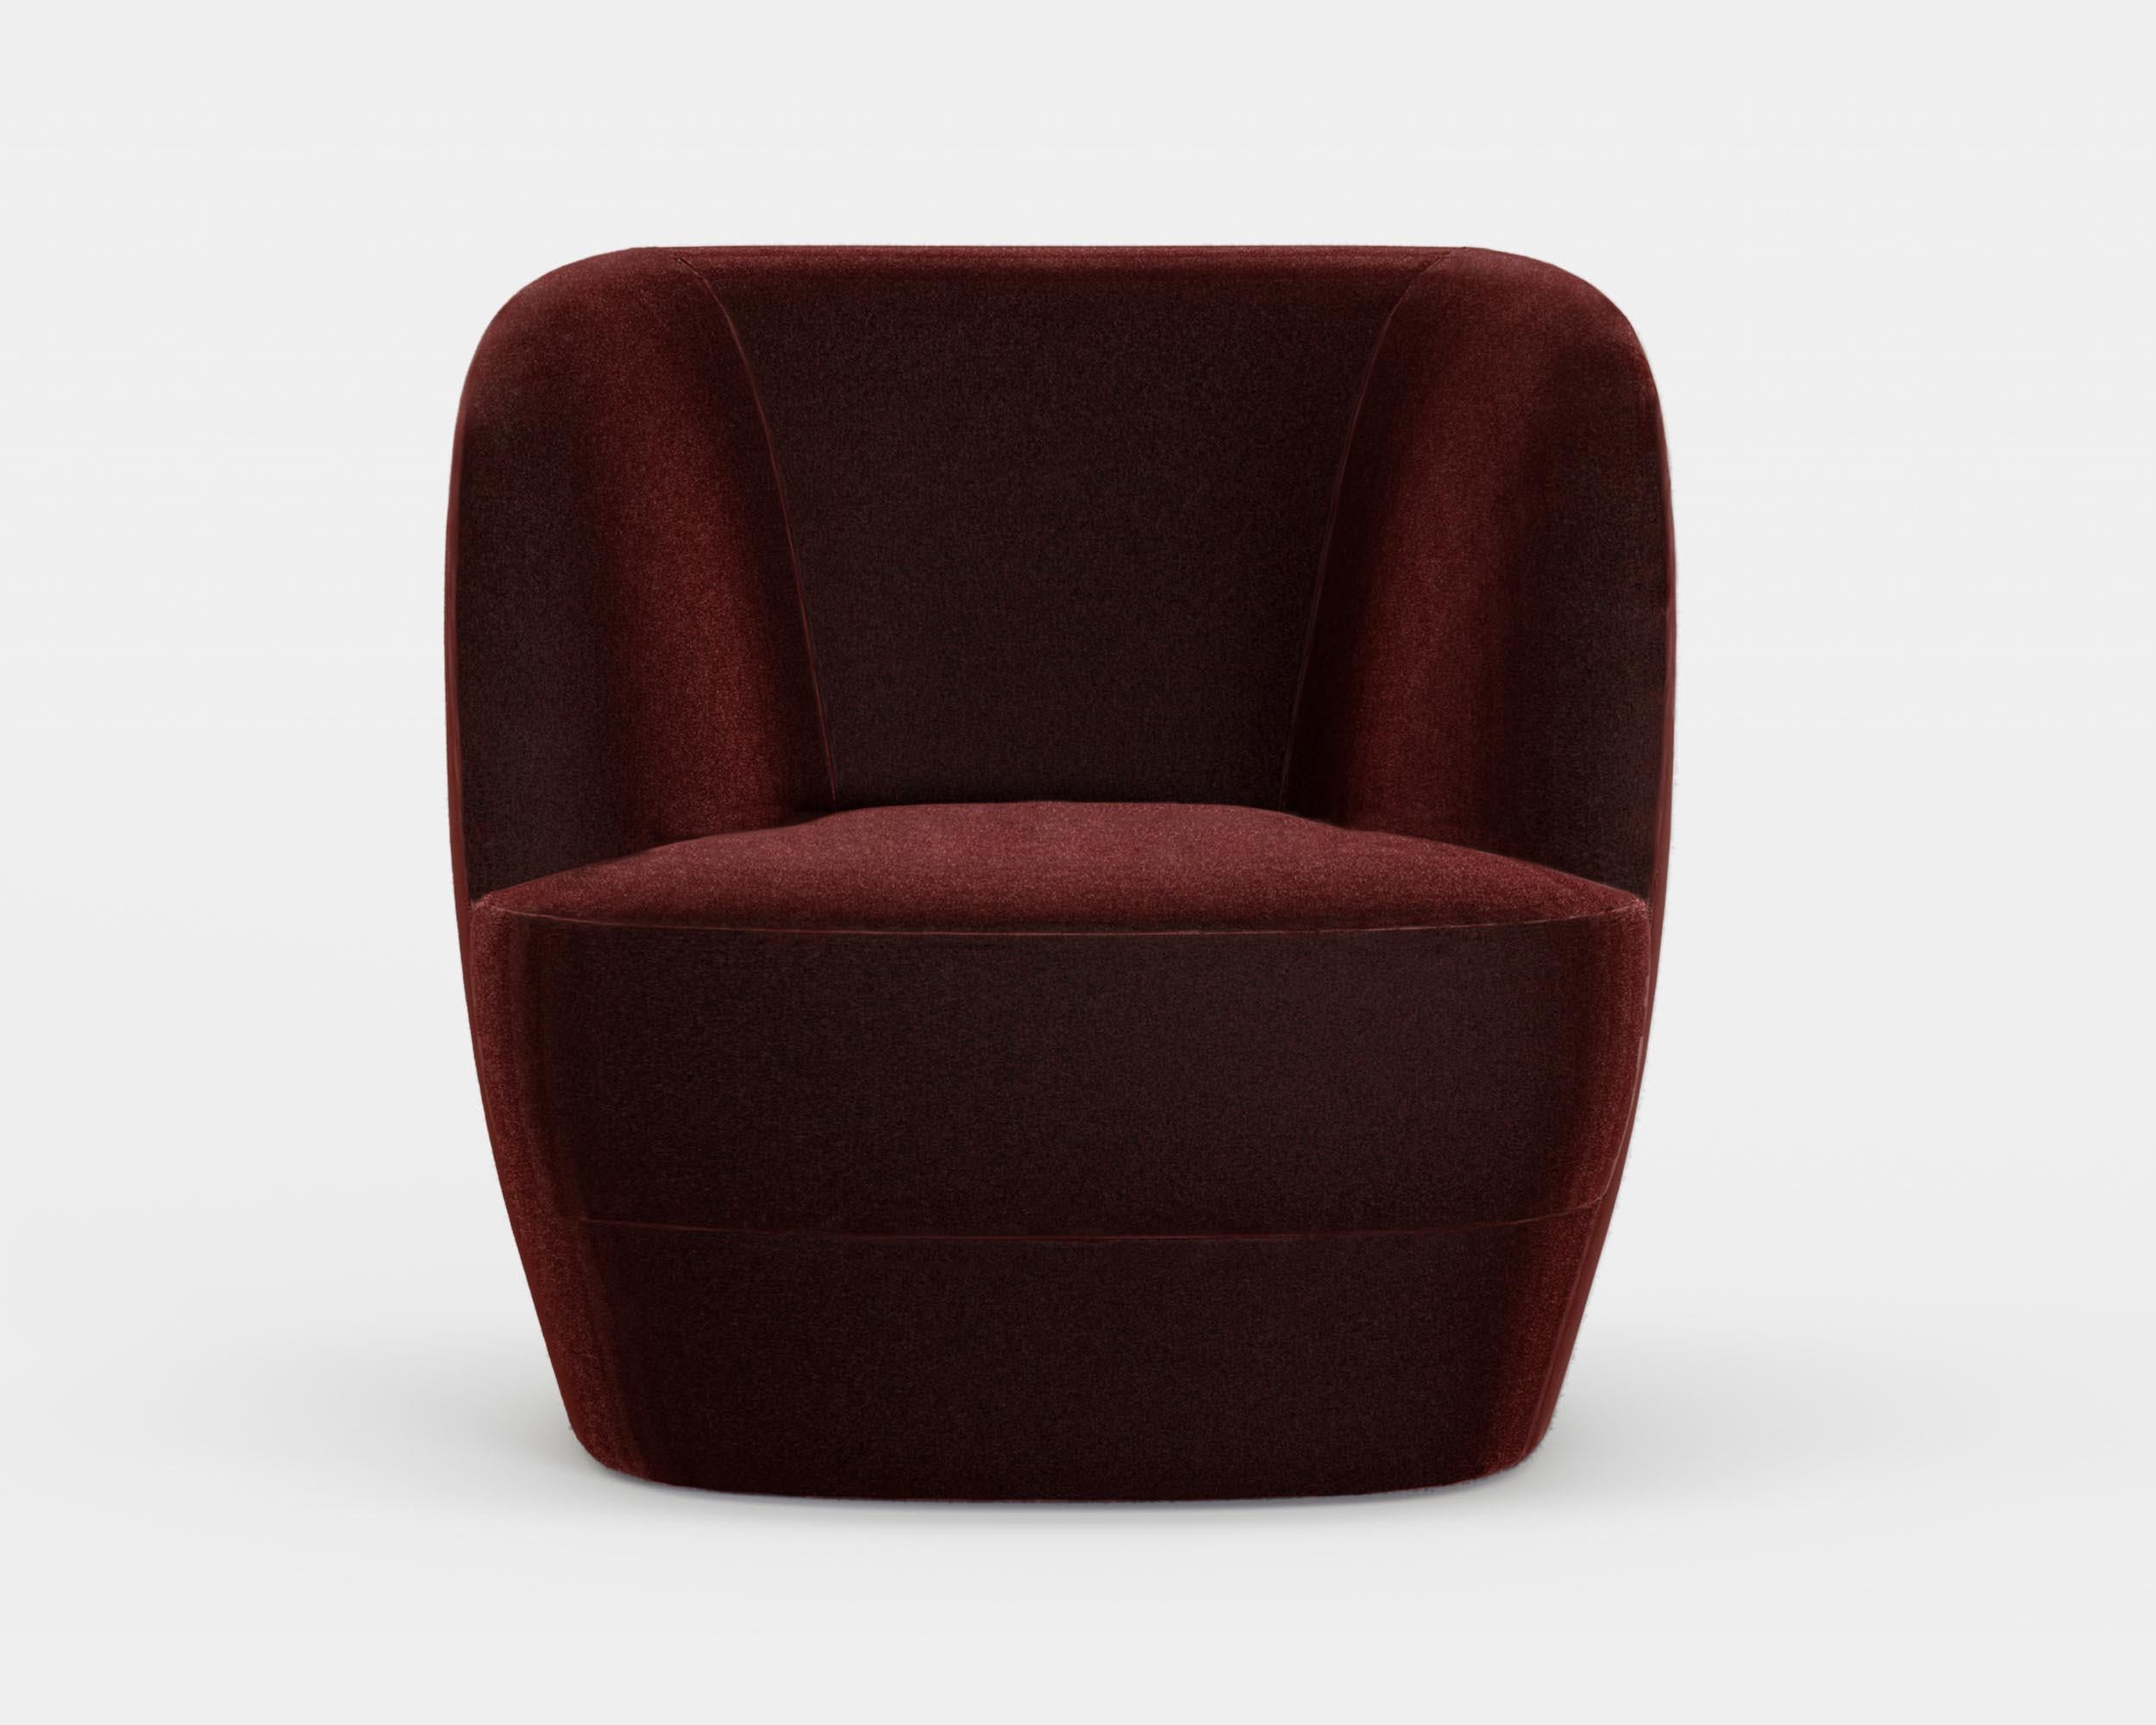 'Lombard Street' Armchair by Man of Parts
Signed by Yabu Pushelberg

Dimensions:
- H. 77 x W. 76 x D. 79 cm  / Seat 41 cm 

Model shown: Sahco, Balboa, 001
A wide range of fabrics is available 

__________________

The Lombard Street armchair was